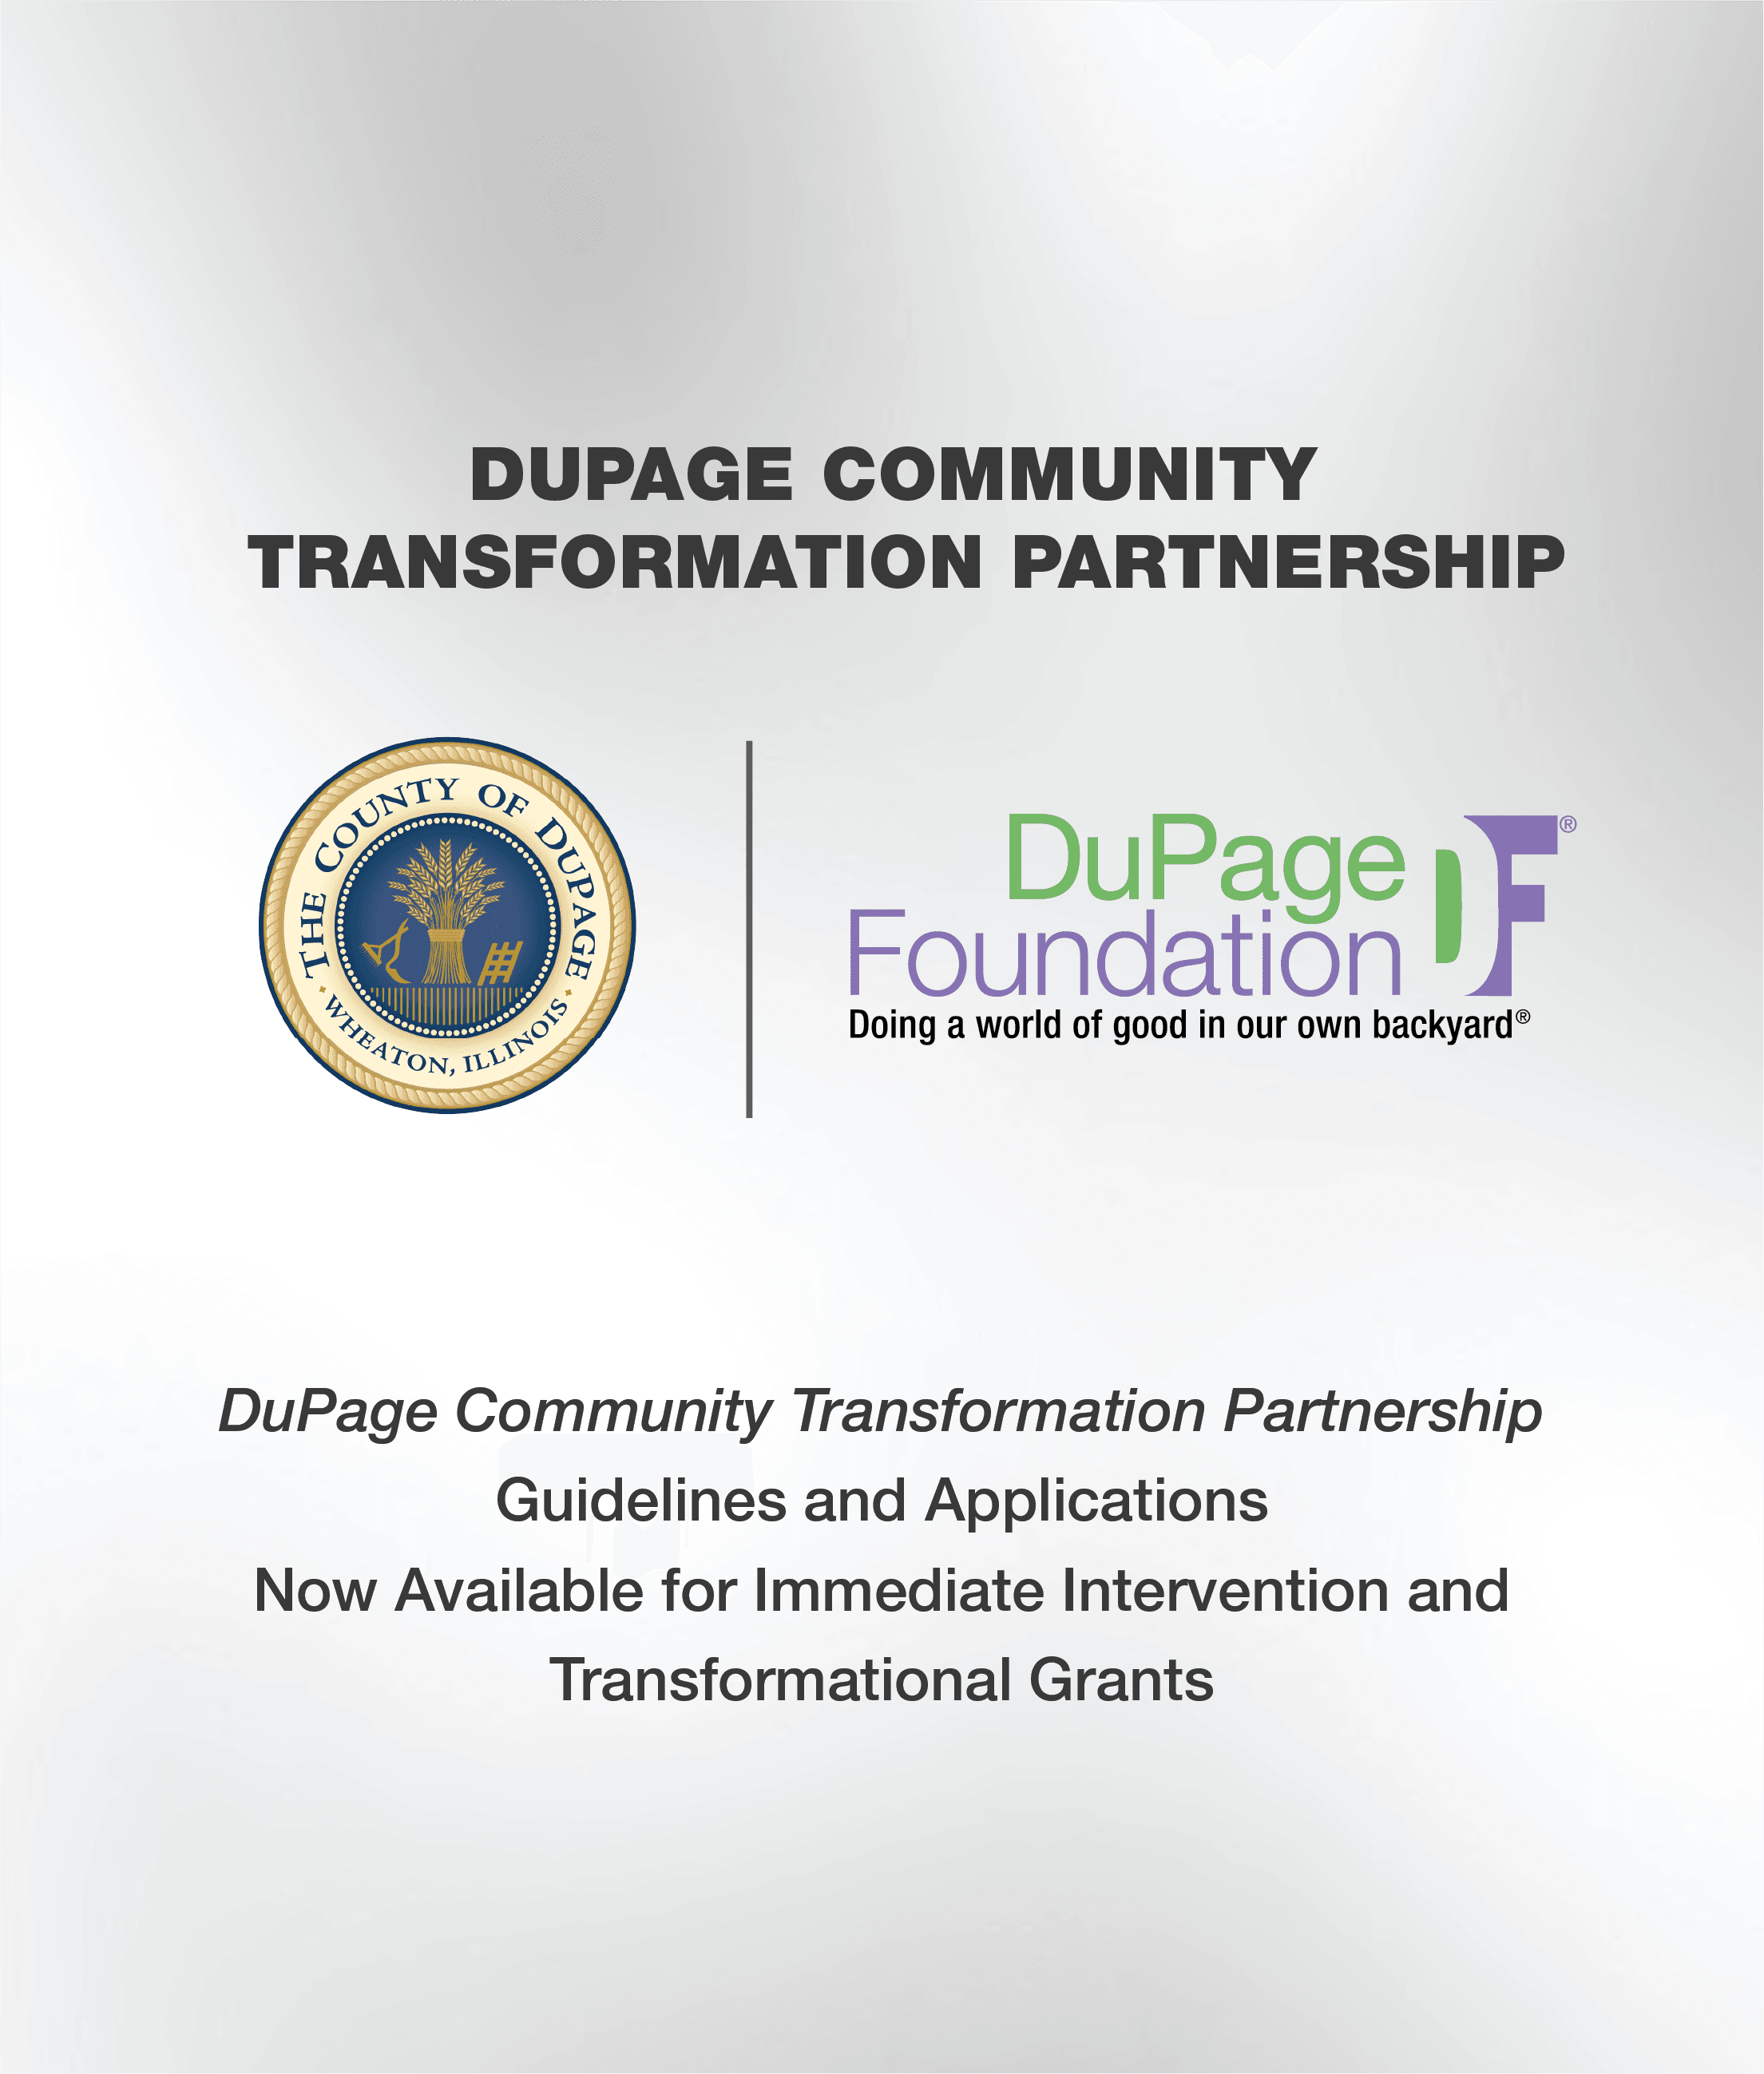 DuPage Community Transformation Partnership Releases Grant Guidelines